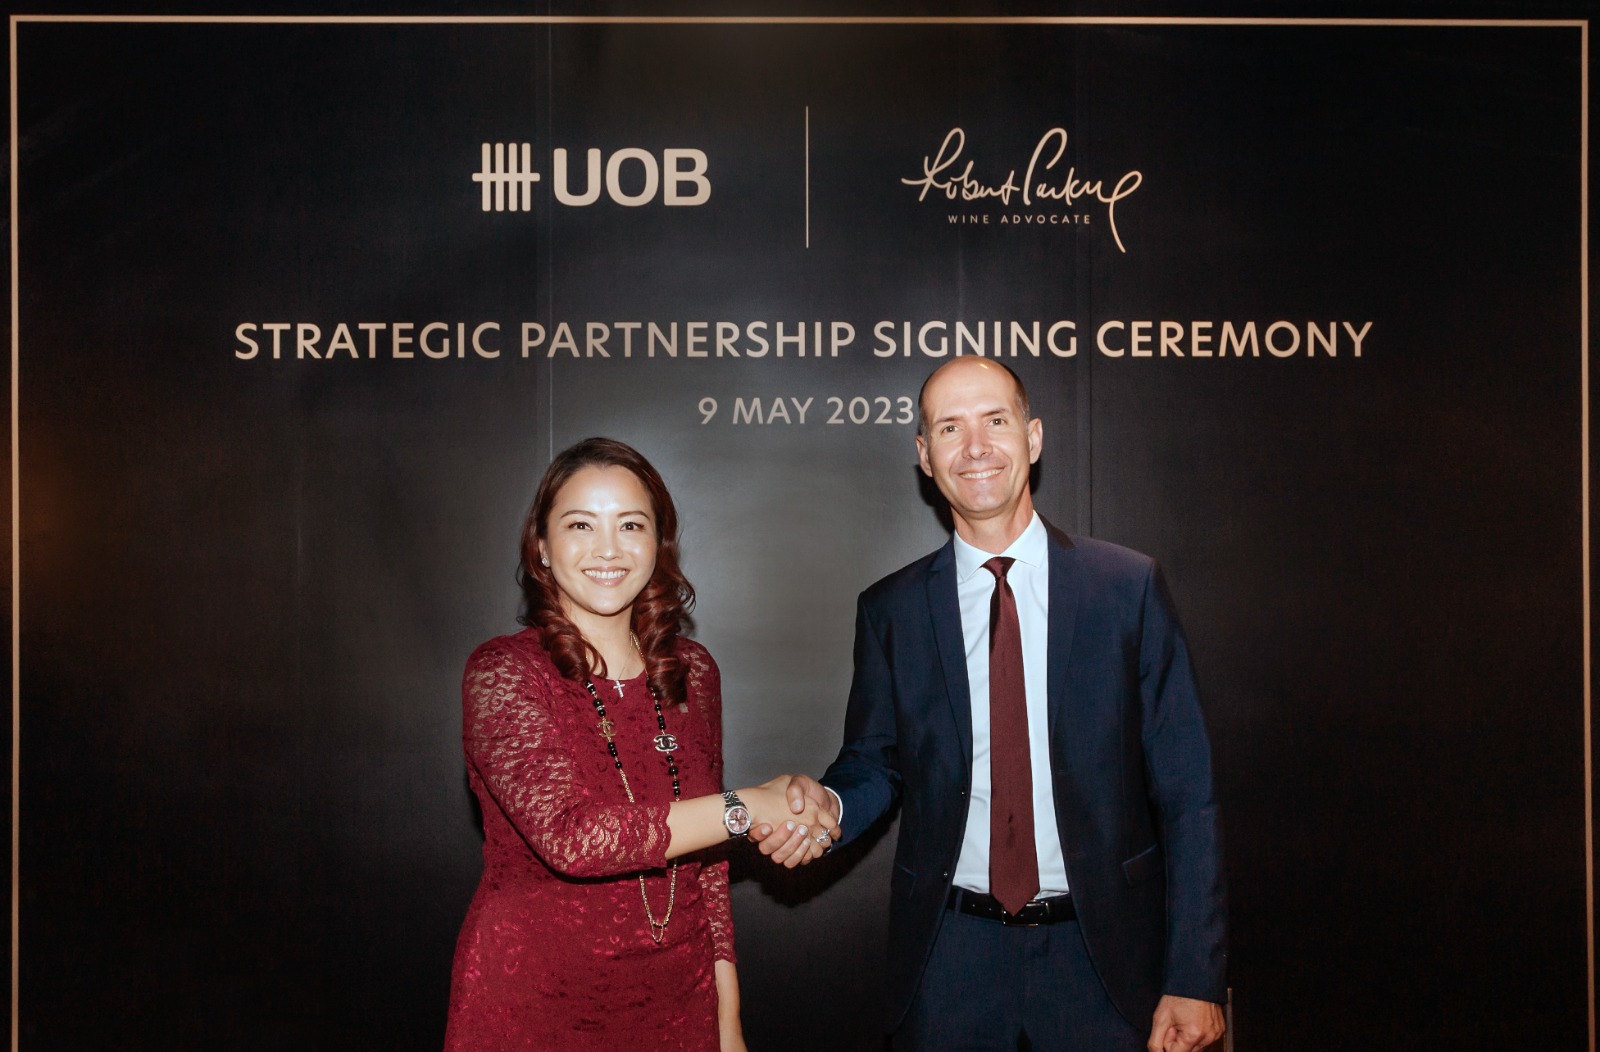 United Overseas Bank (UOB), Managing Director, Head Group Personal Financial Services, Jacquelyn Tan (left) and Robert Parker Wine Advocate, Chief Executive Officer, Mickael Moiroud (right).